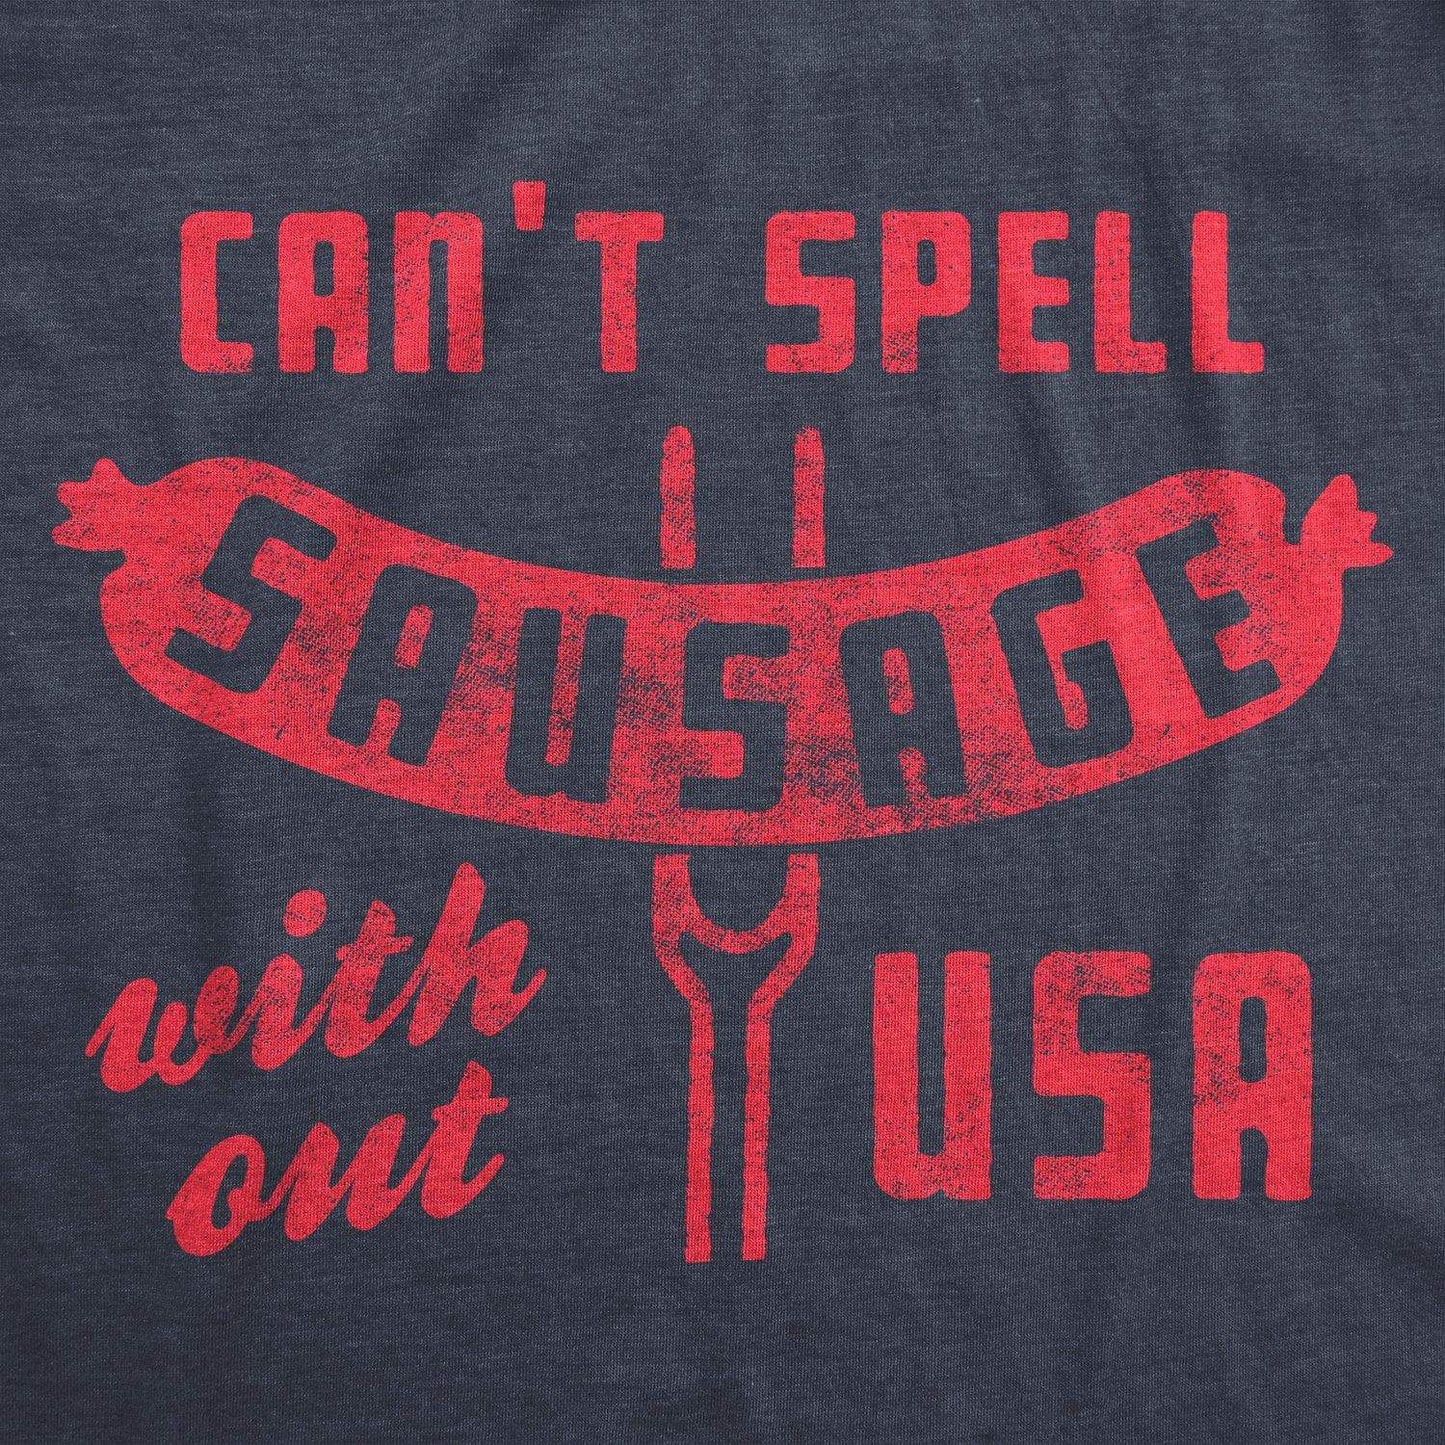 Can't Spell Sausage Without USA Men's T-Shirt